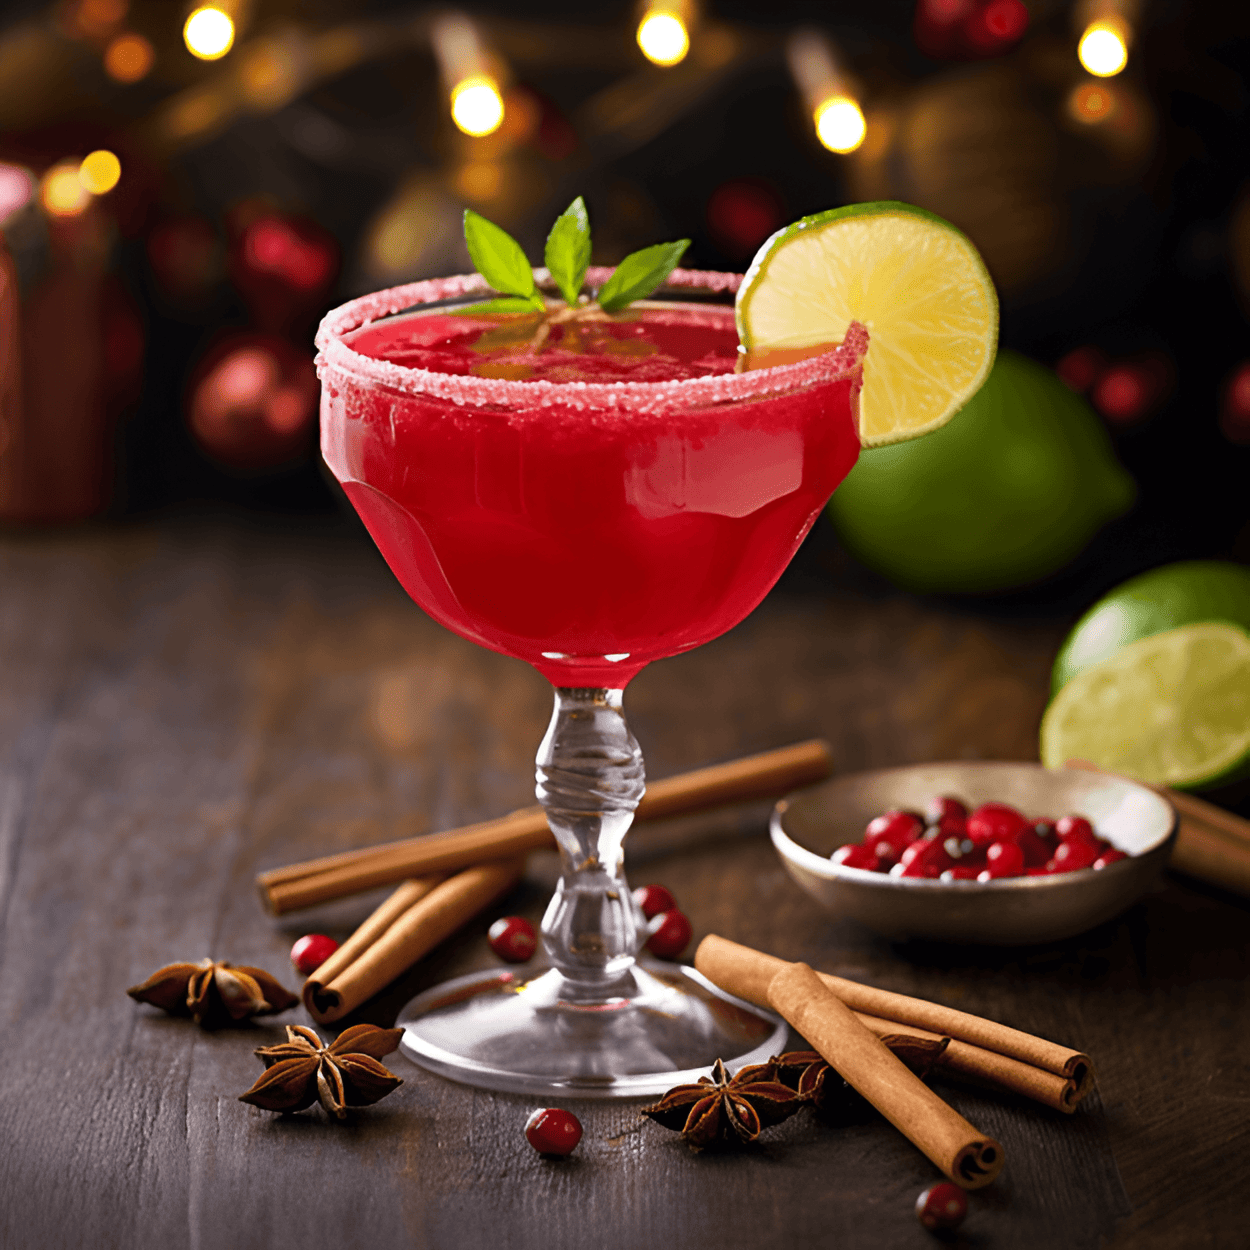 Trinidad Sorrel Cocktail Recipe - The Trinidad Sorrel cocktail is a delightful blend of sweet, tart, and spicy. The Sorrel gives it a unique tartness, while the added sugar provides a balancing sweetness. The rum adds a warming kick, and the spices give it a complex depth of flavor.